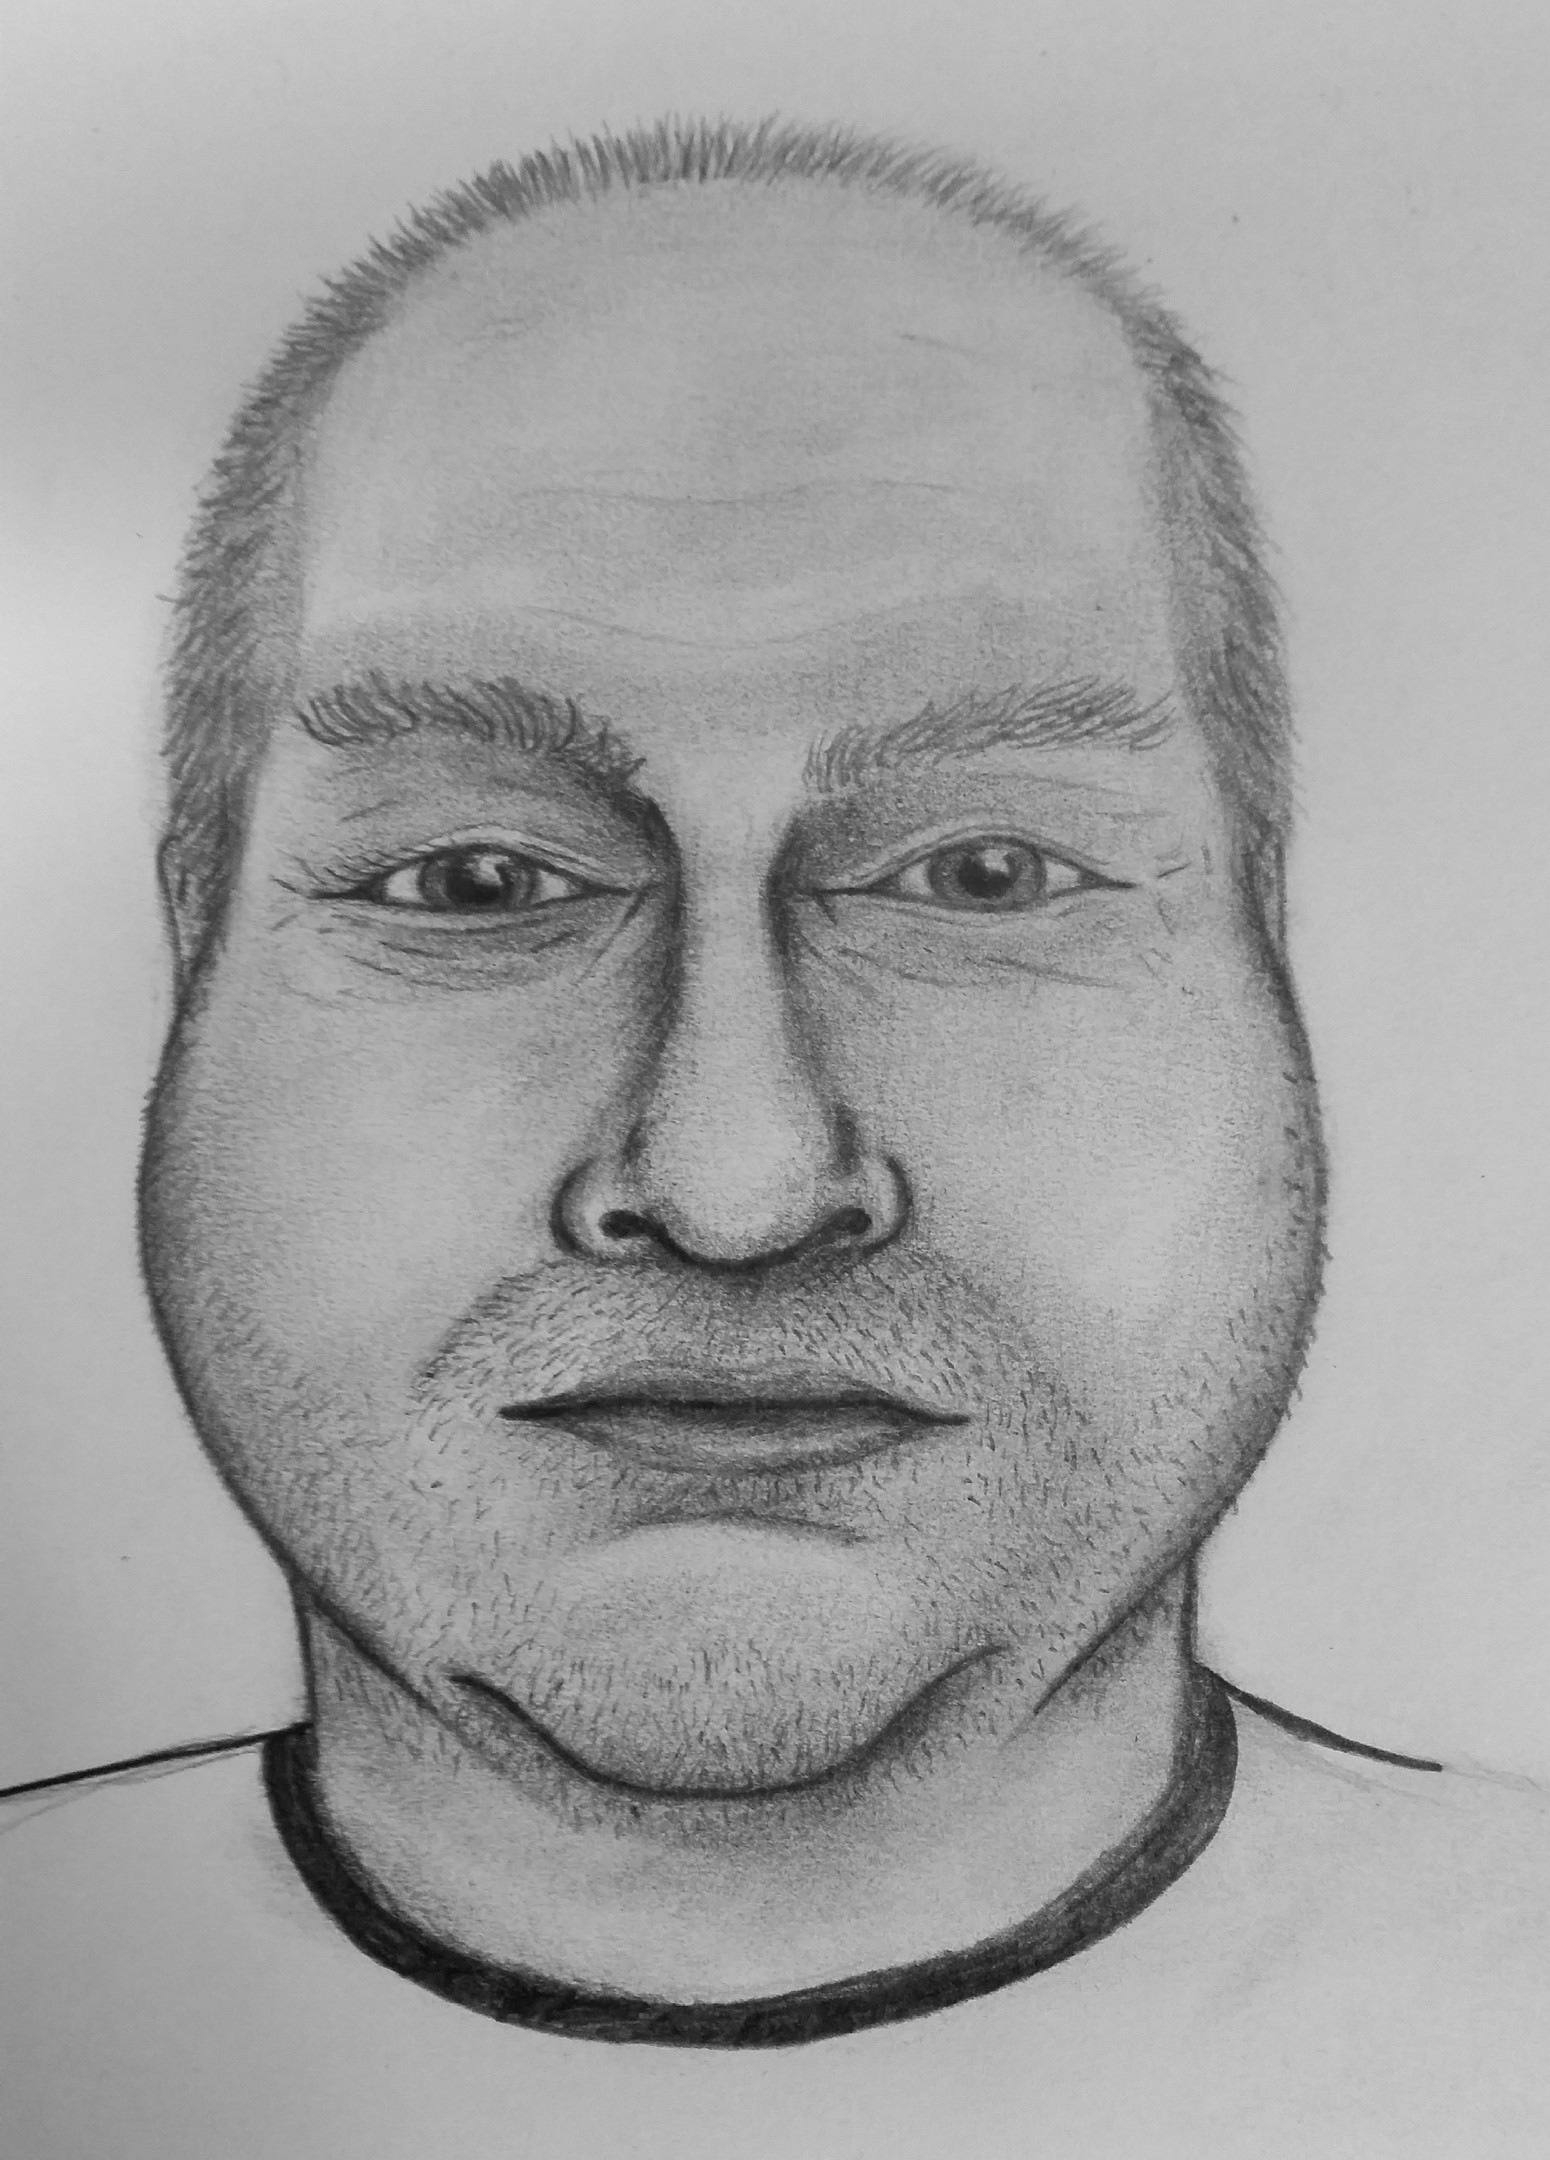 A police sketch of the unknown man found on Denburn Road